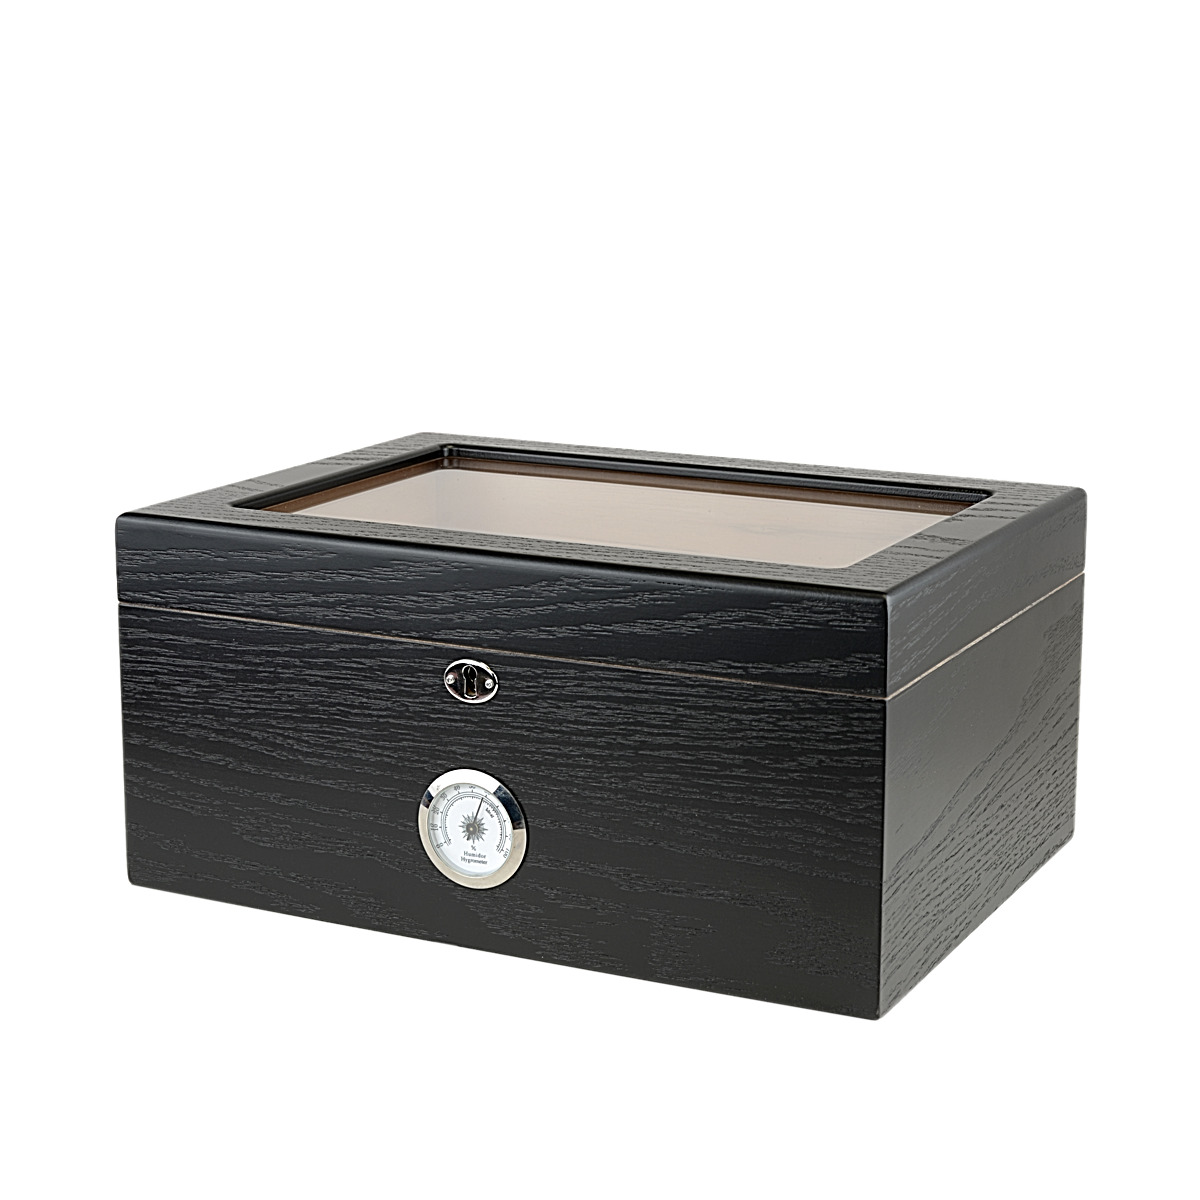 Quality Importers Milano Glasstop Cigar Humidor, Holds 75-100 Cigars, Black Oak